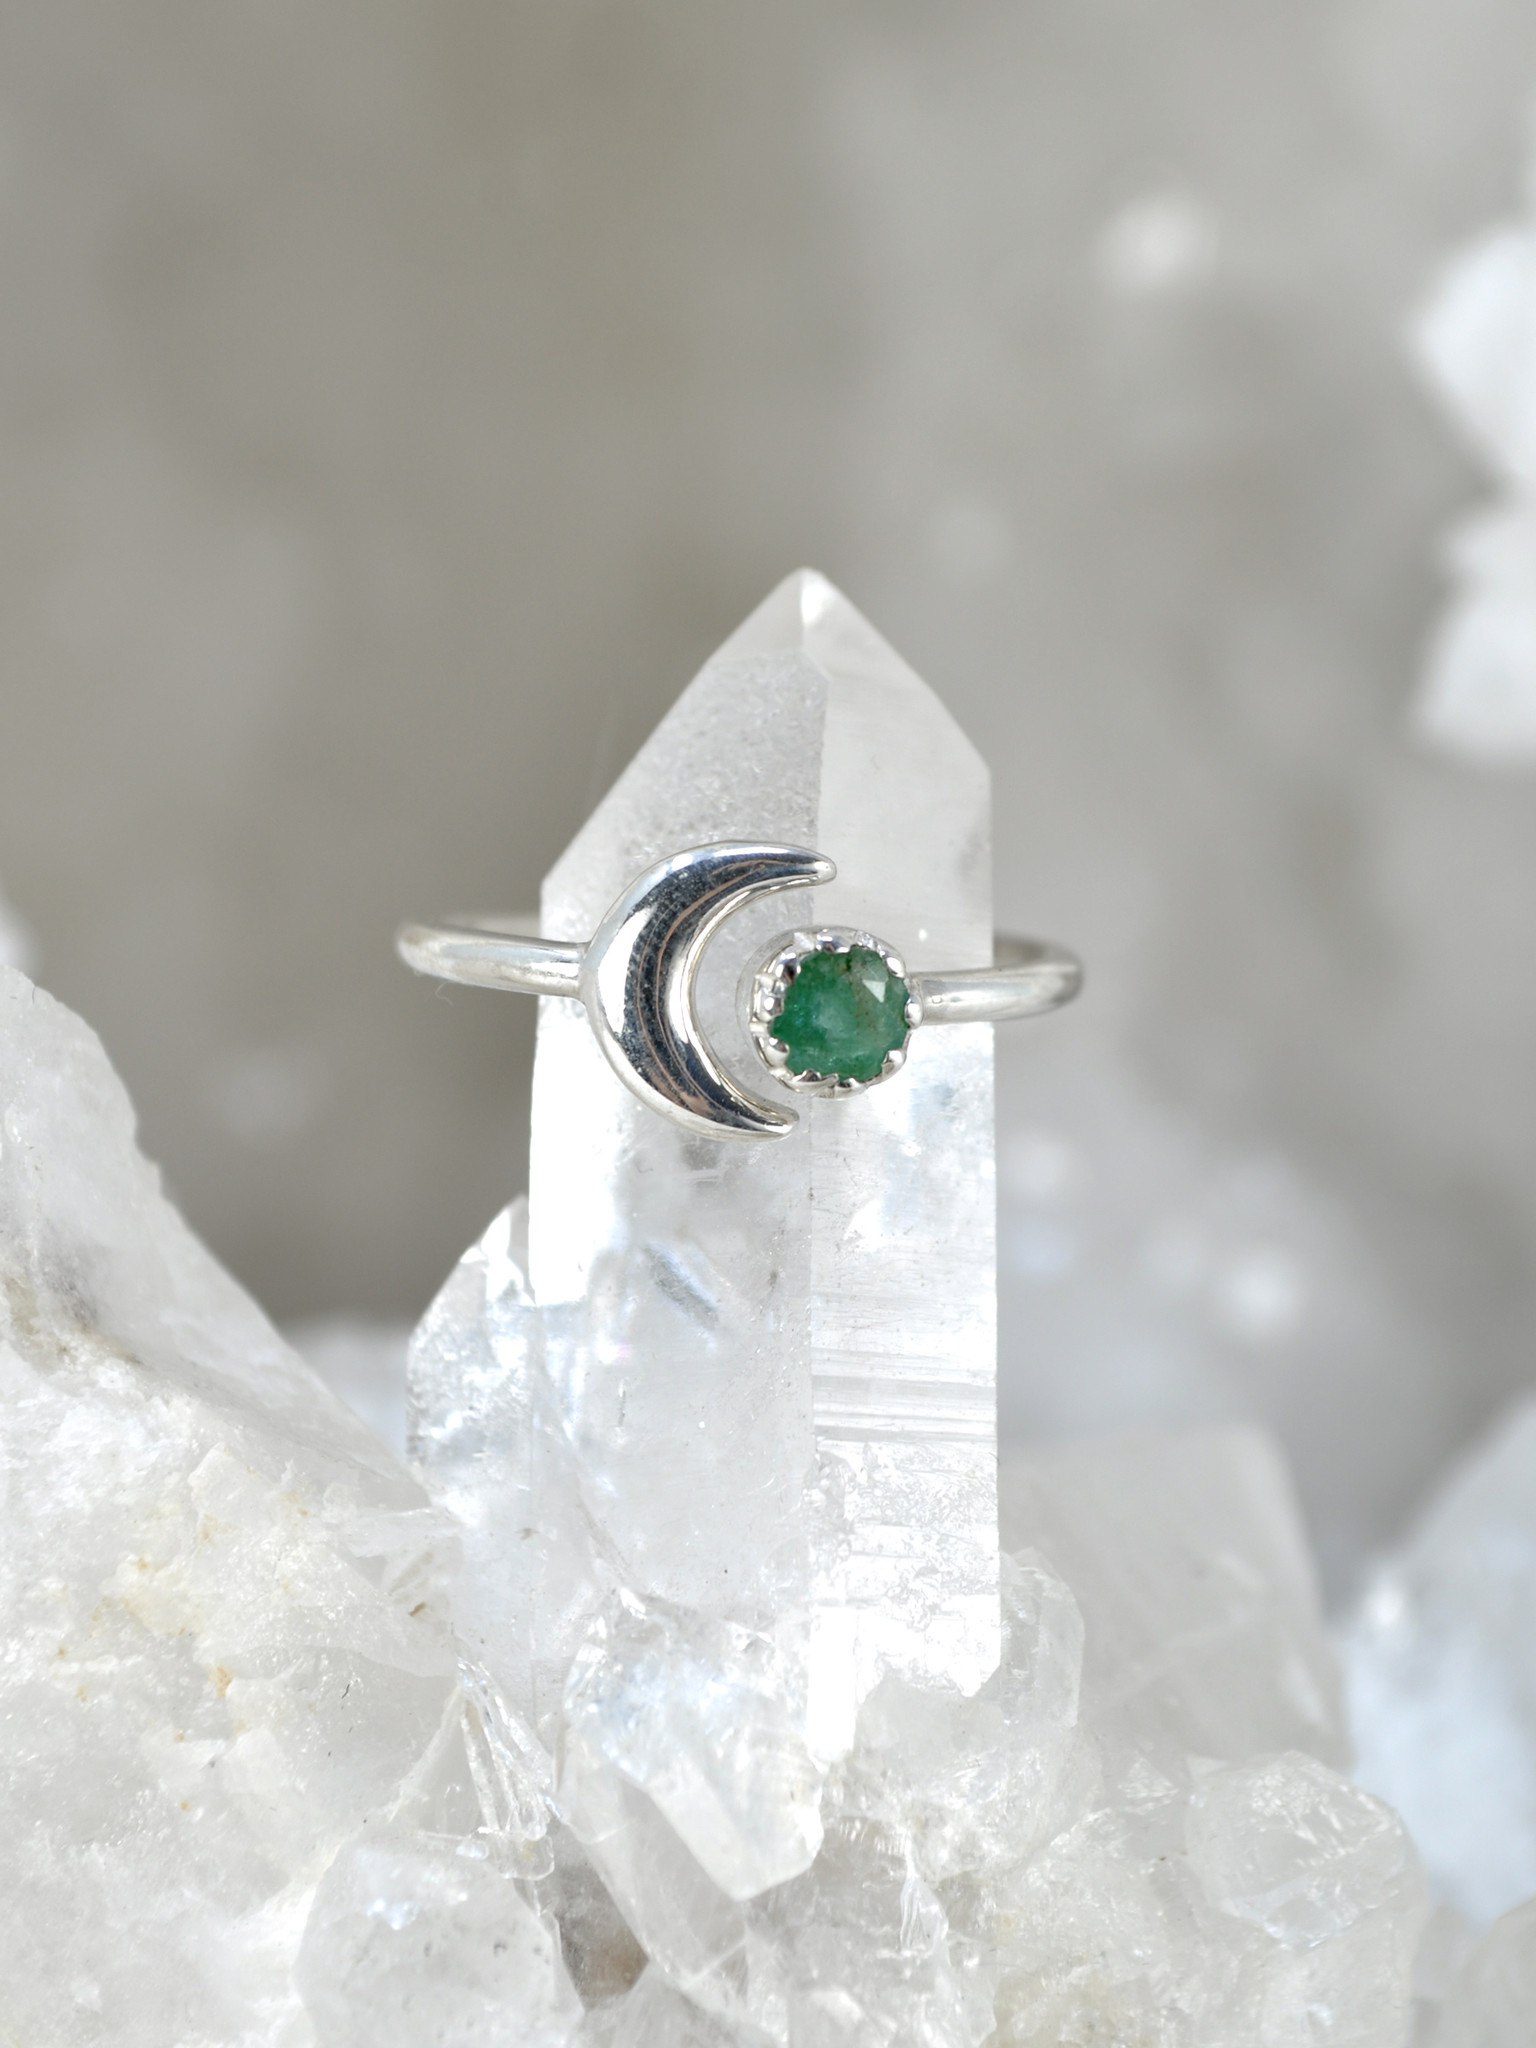 Stunning India Emerald ring with a small green emerald stone surrounded by a moon crescent shaped silver setting